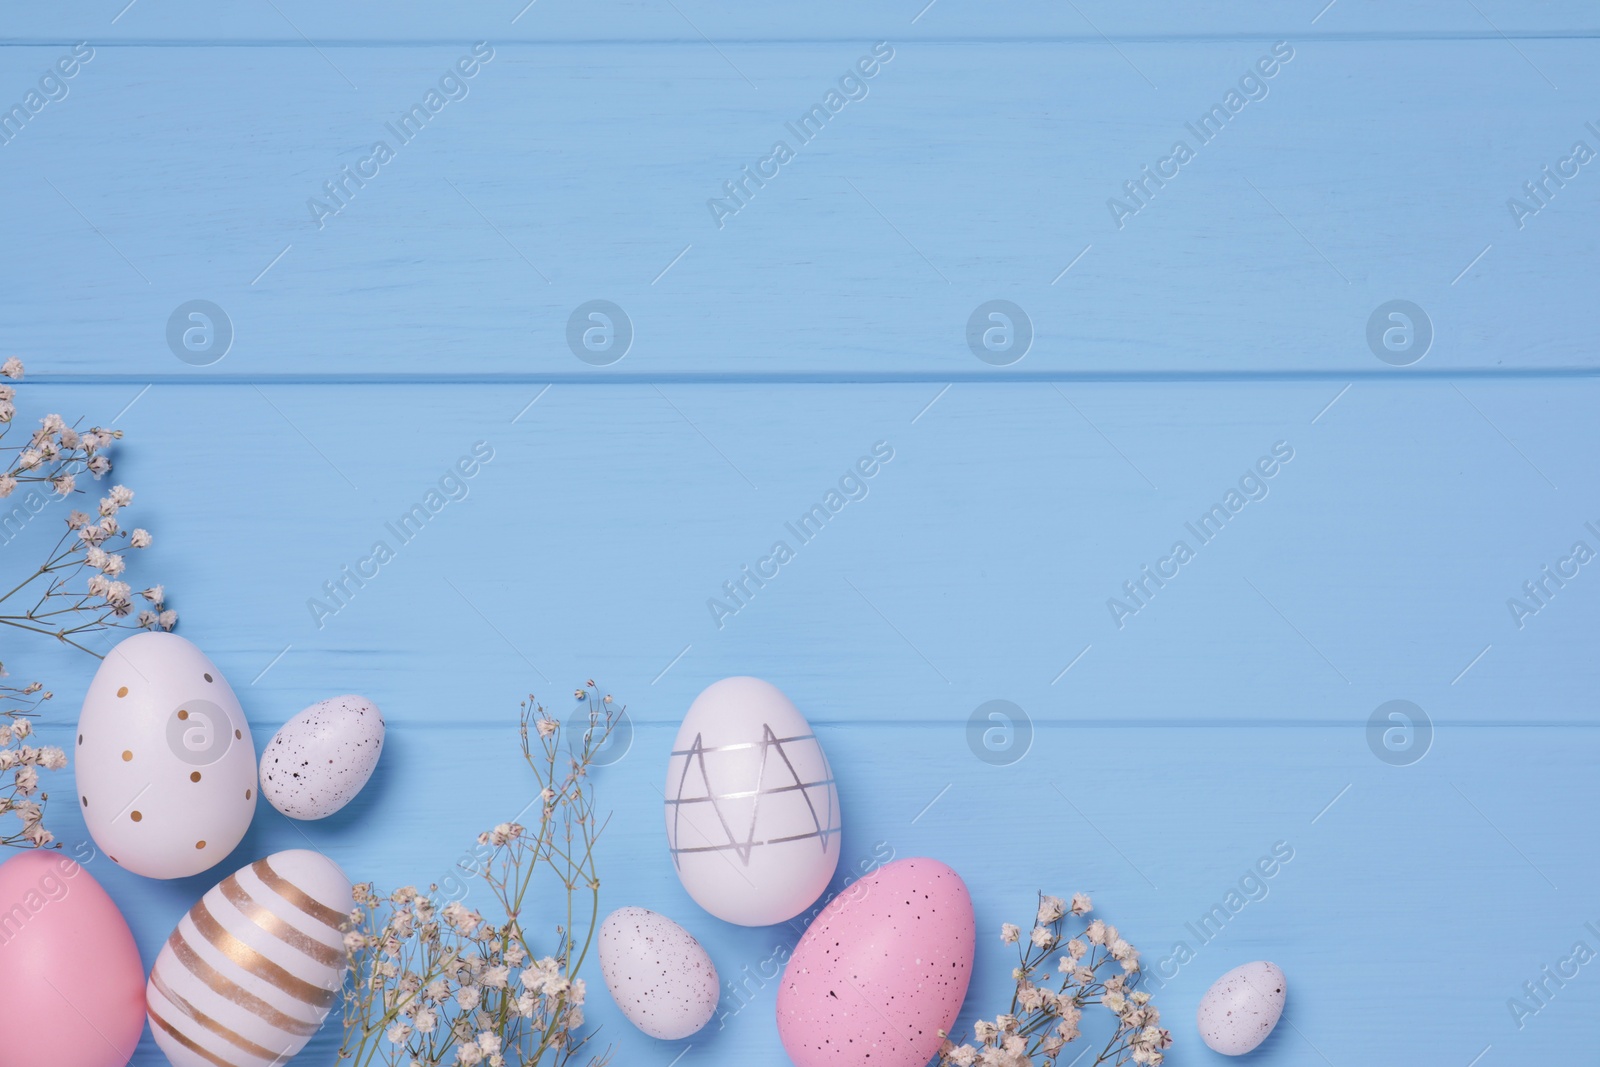 Photo of Flat lay composition with festively decorated Easter eggs and gypsophila flowers on light blue wooden table. Space for text